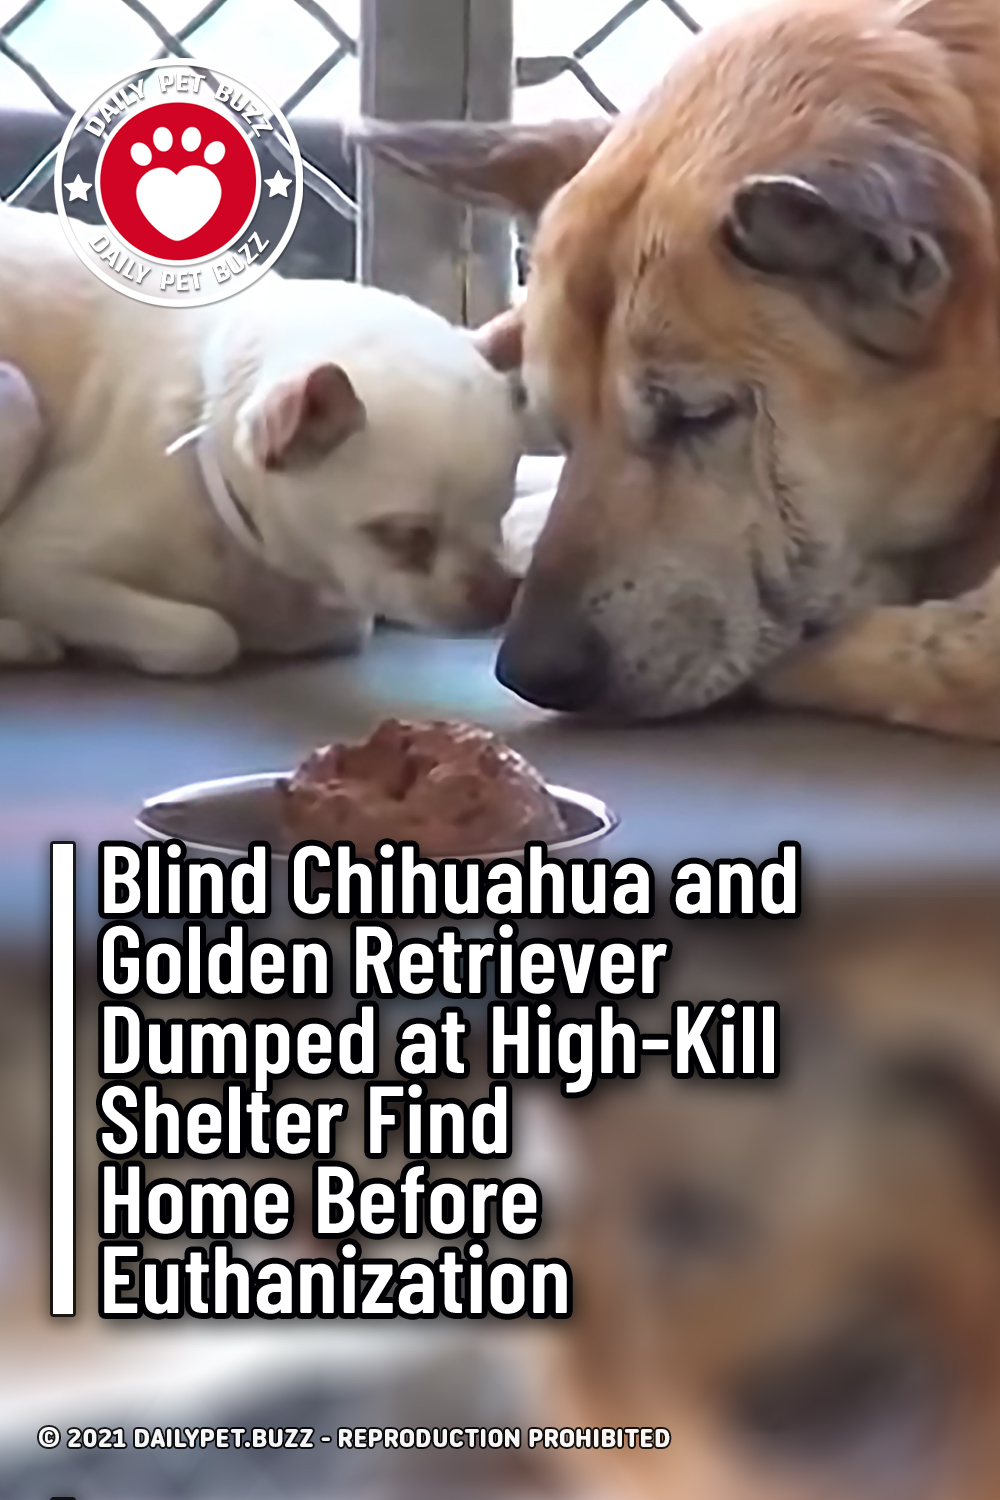 Blind Chihuahua and Golden Retriever Dumped at High-Kill Shelter Find Home Before Euthanization